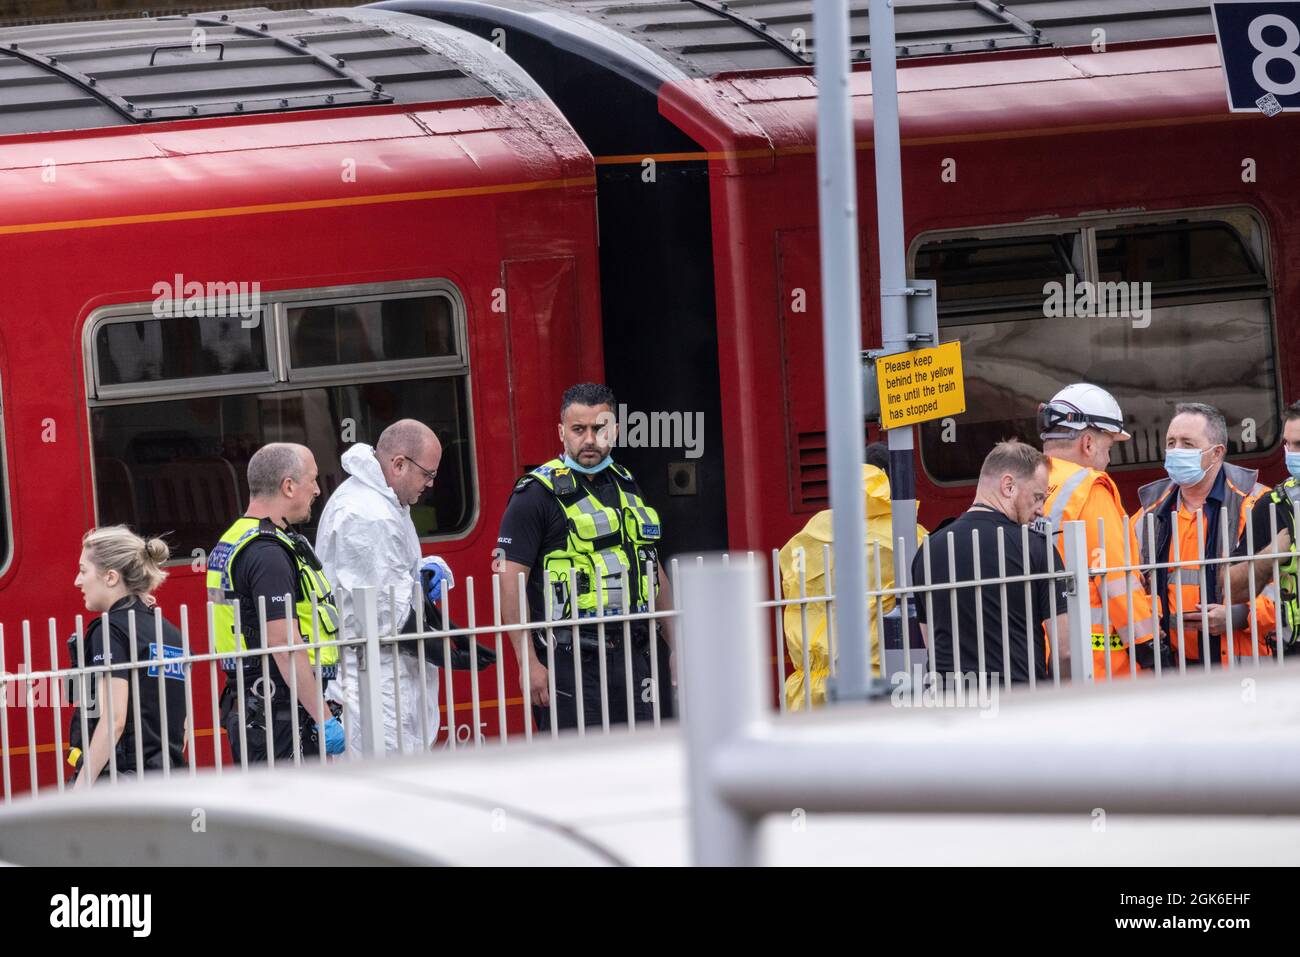 London, UK. September 13 2021: Rail Track Accident at Wimbledon main Train Station. The station has been closed for train & tram travel due to an incident. 13th September 2021. Credit: Clickpics/Alamy Live News Stock Photo